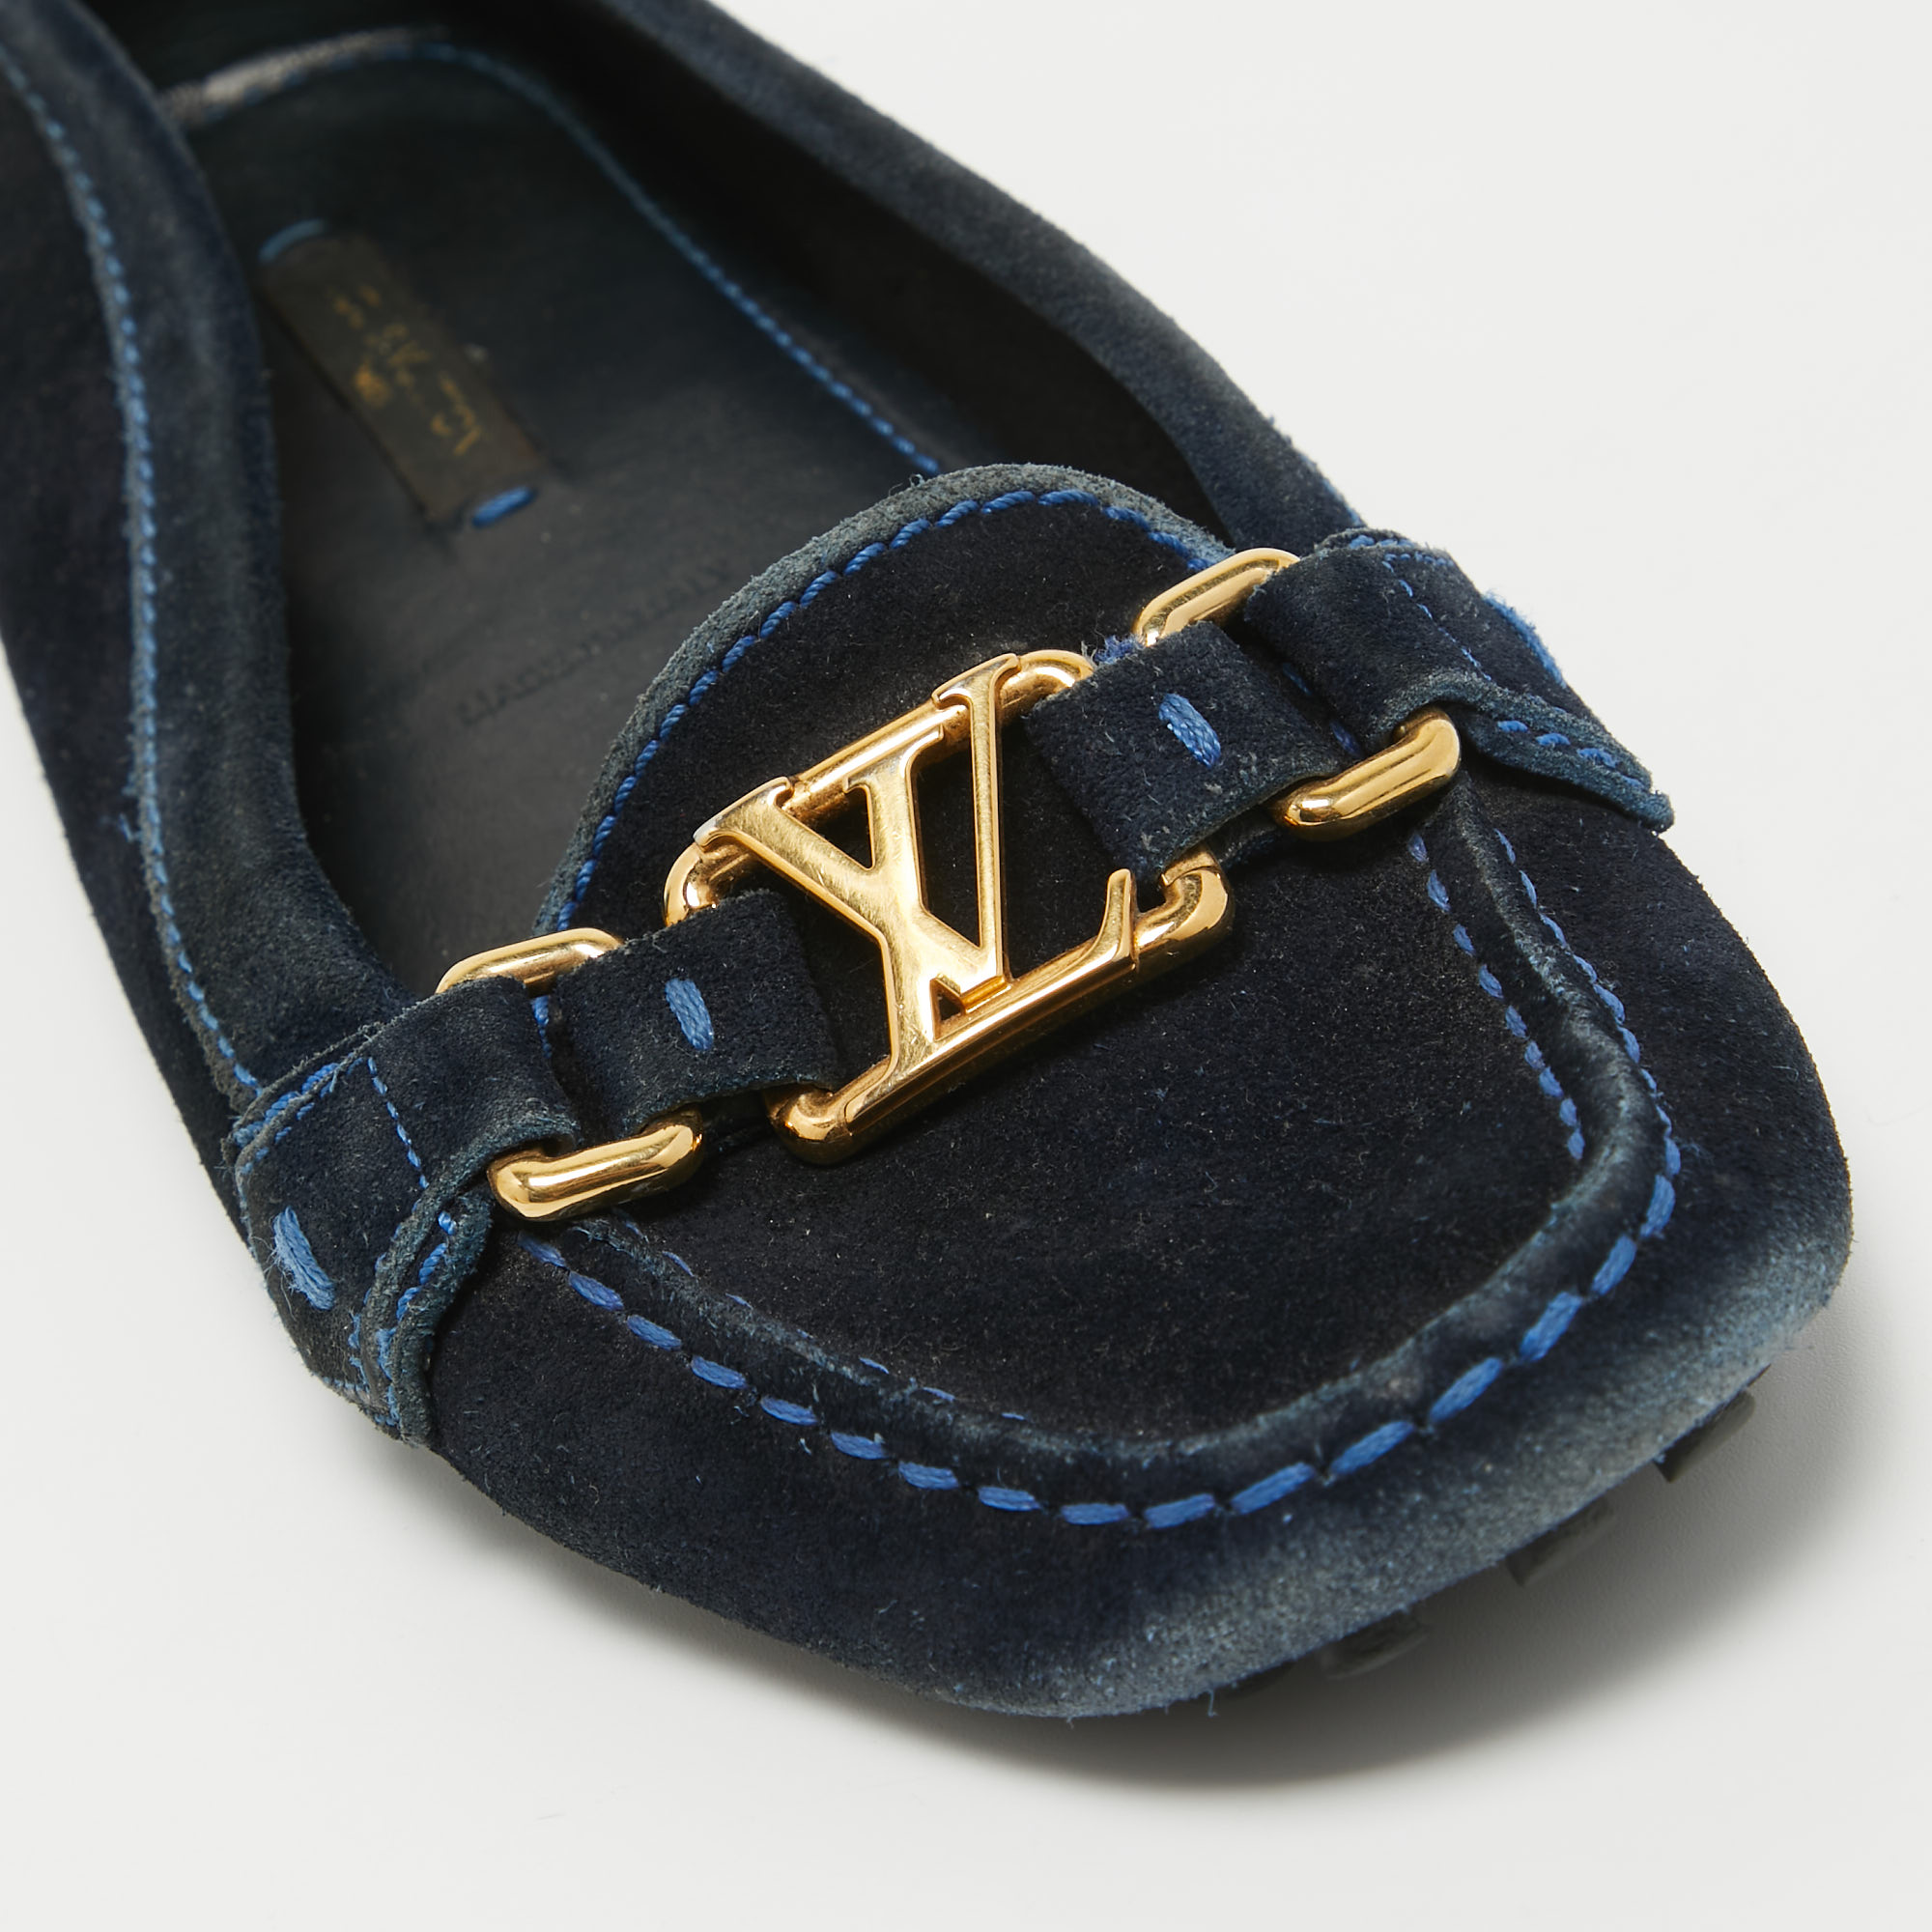 Louis Vuitton Navy Blue Suede Oxford Loafers Size 35.5